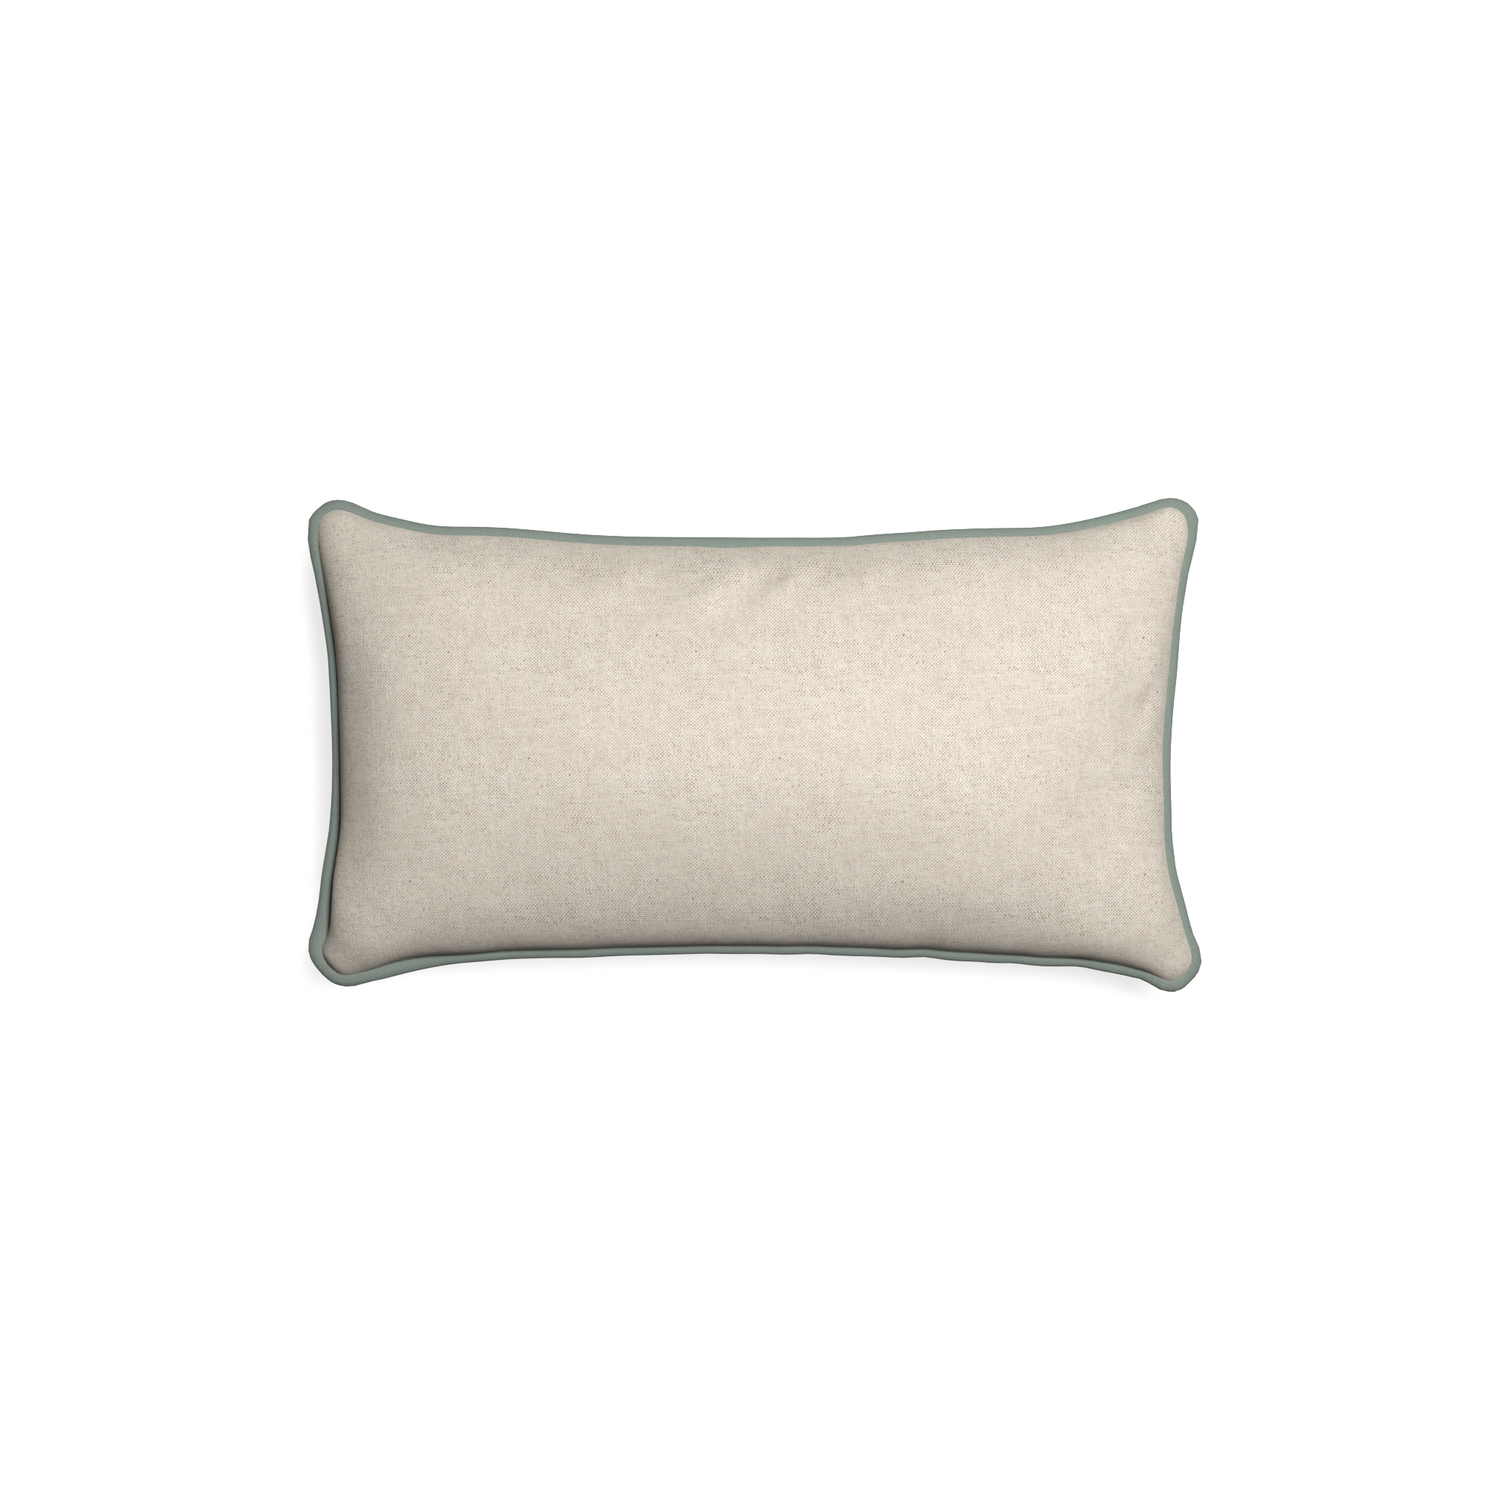 Petite-lumbar oat custom light brownpillow with sage piping on white background